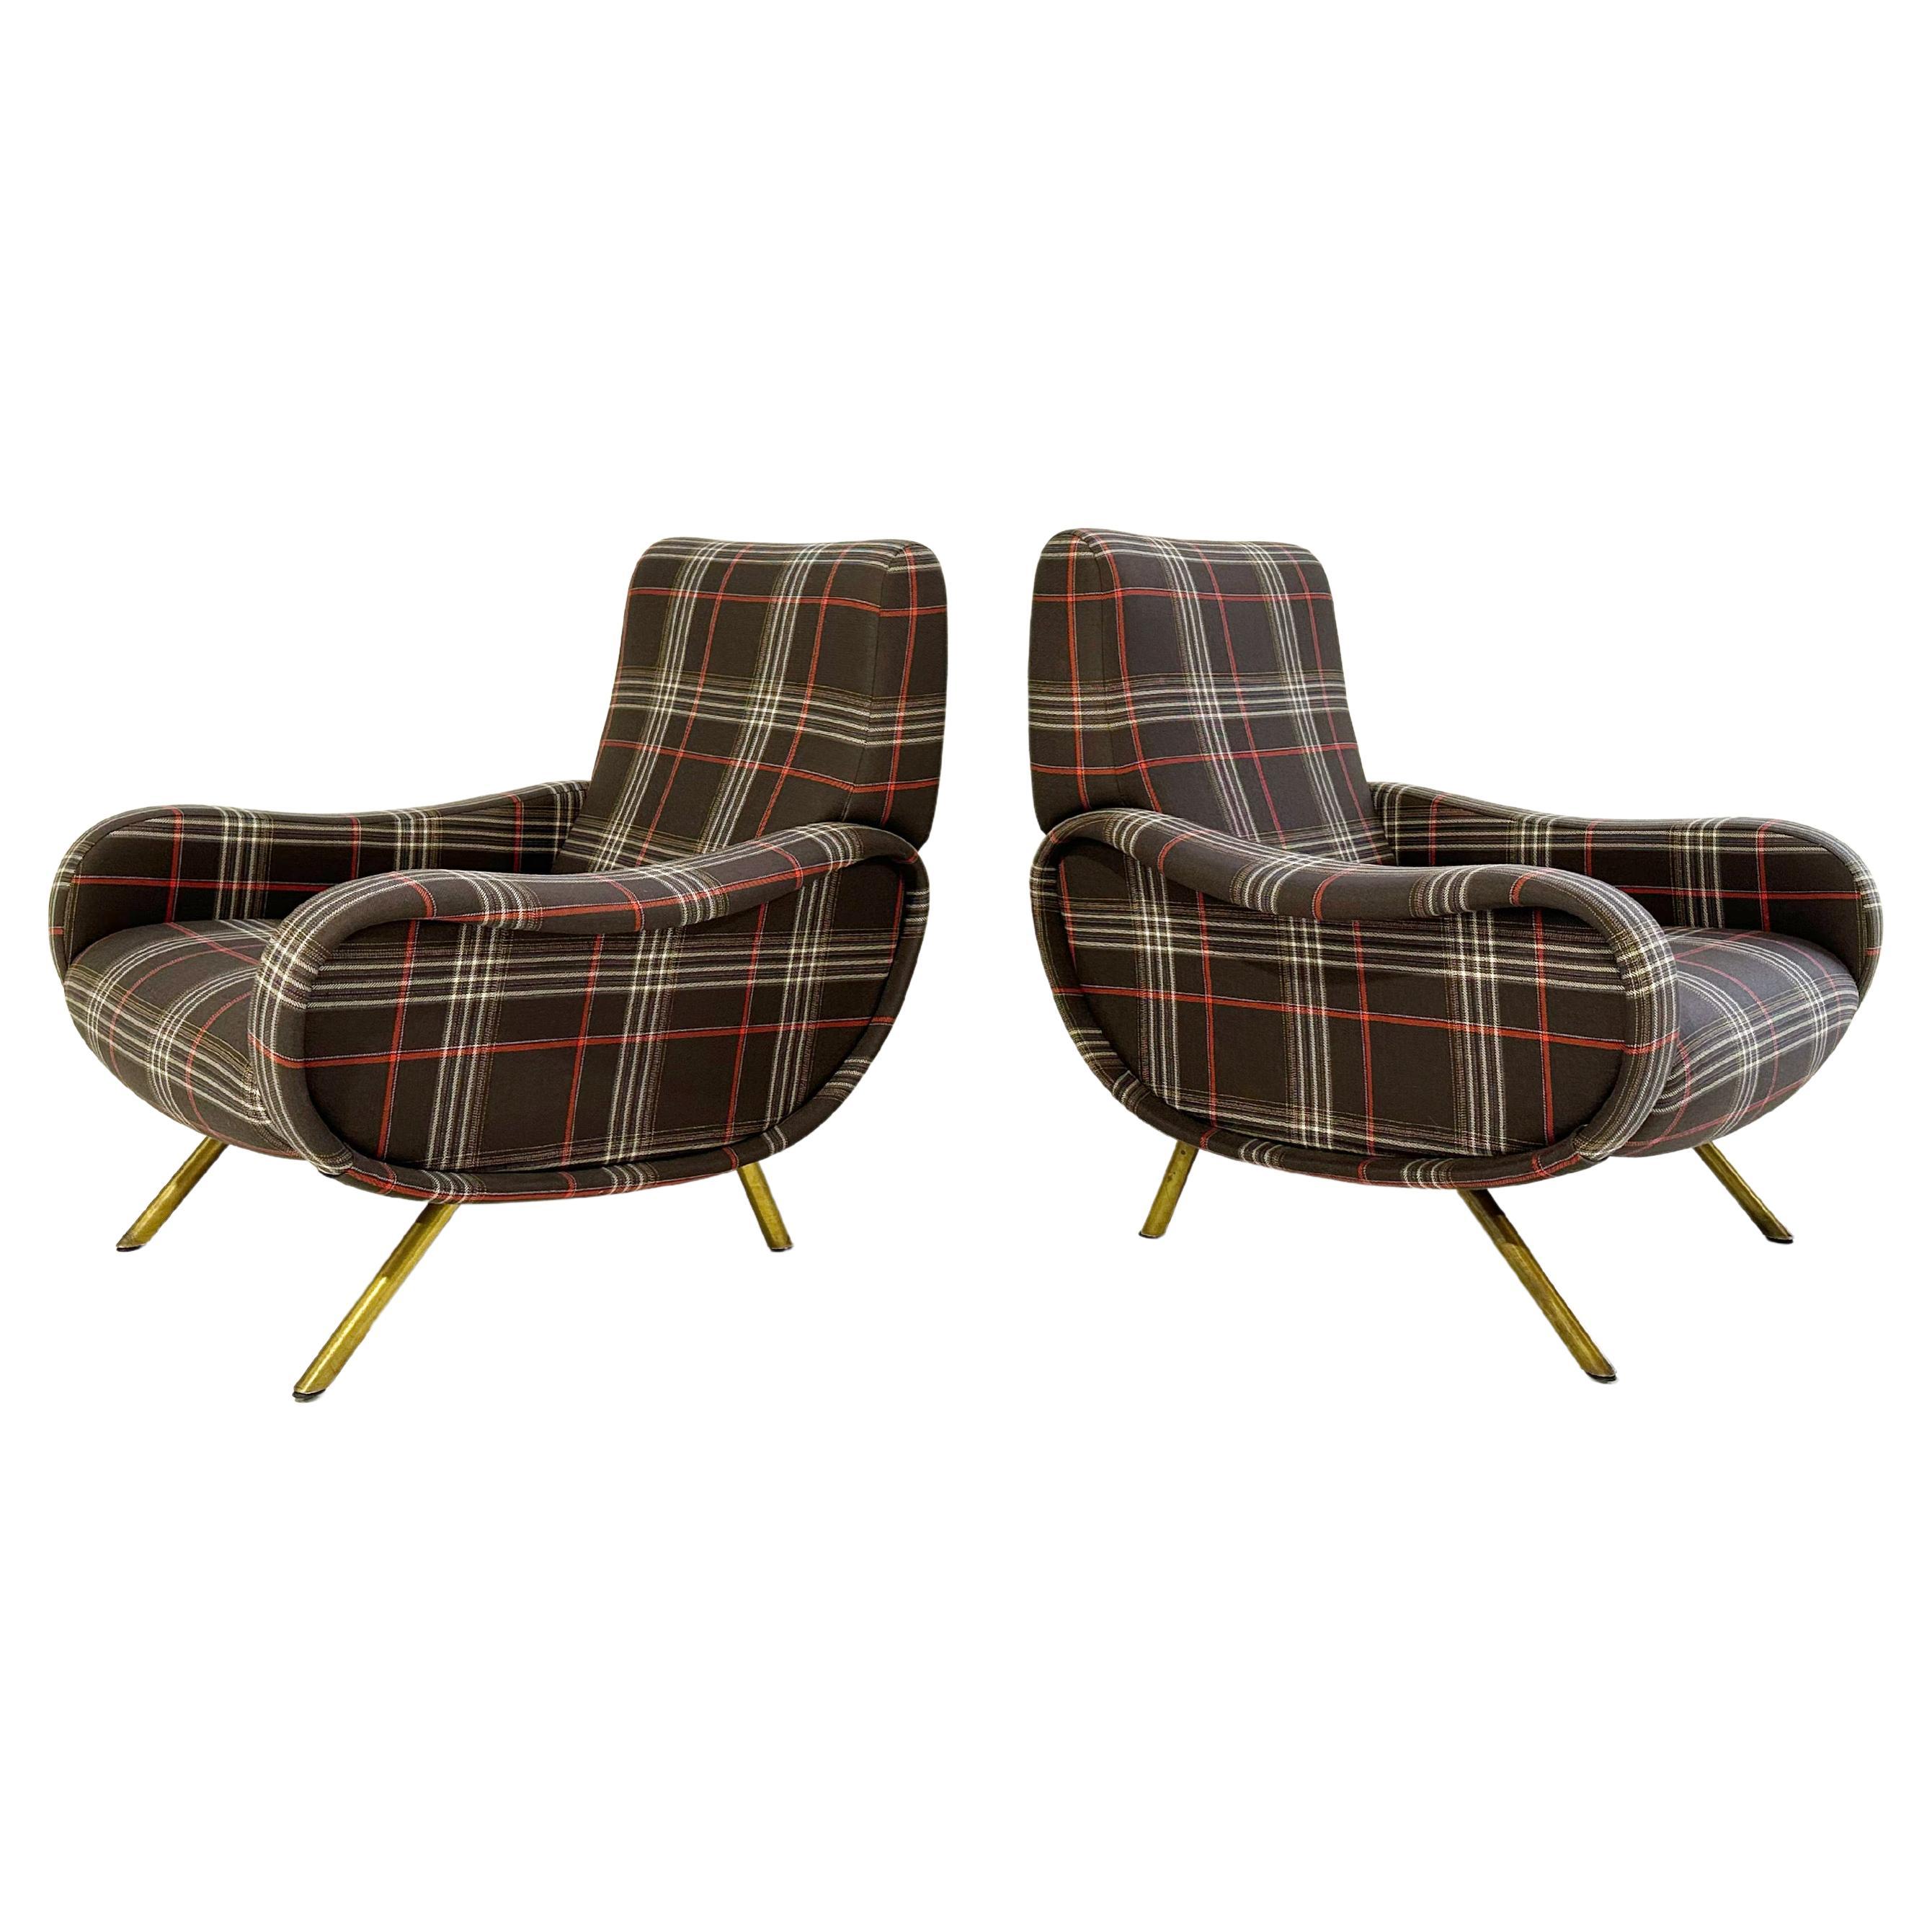 Vintage Marco Zanuso Lady Lounge Chairs, Pair For Sale